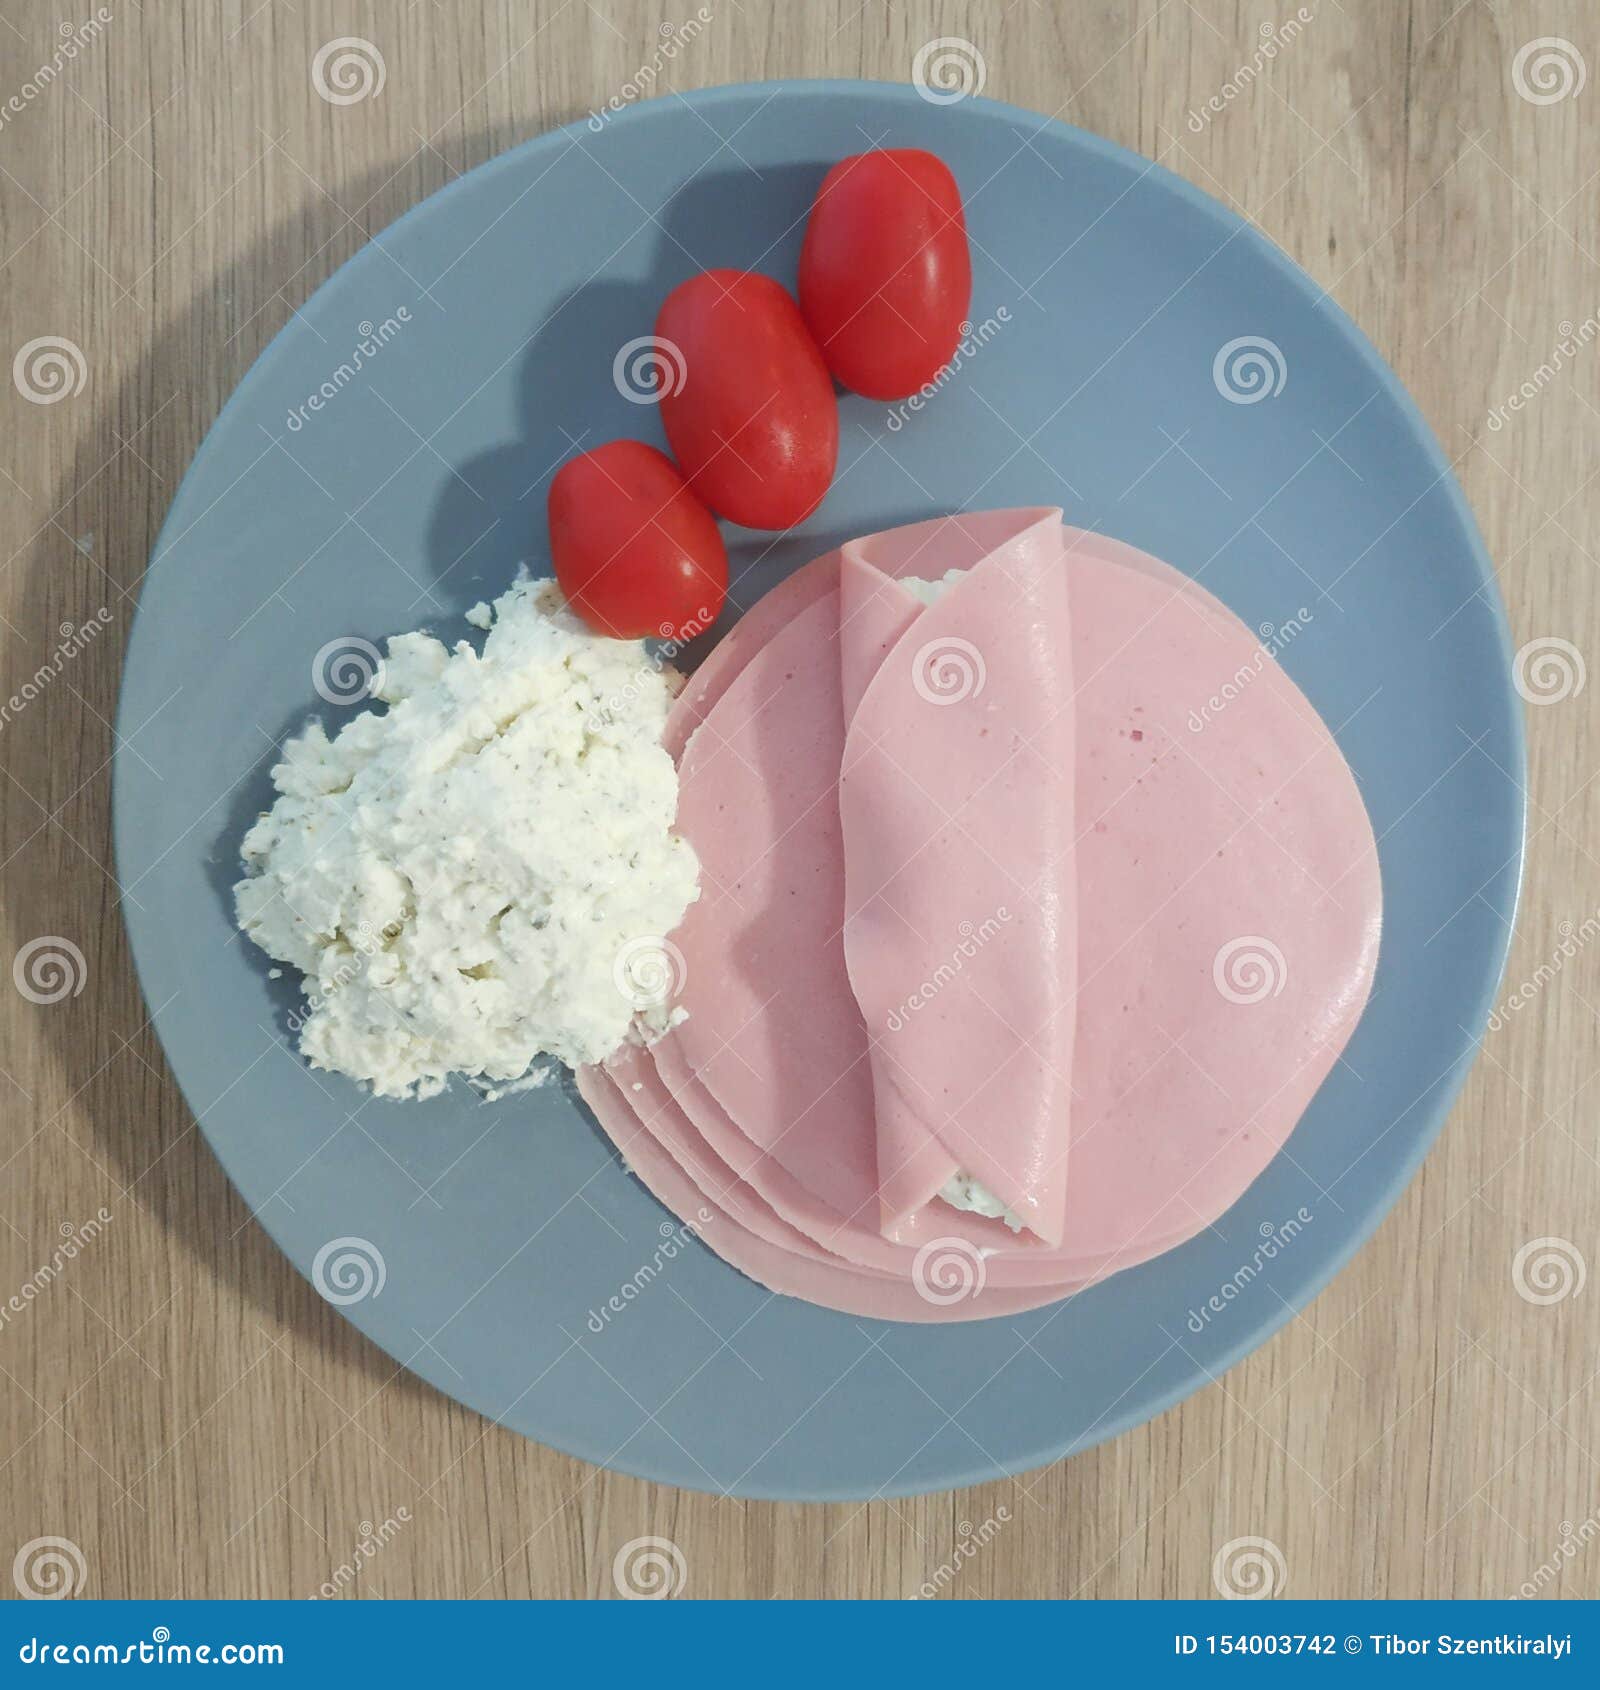 Ketogenic Meal Cottage Cheese Ham Tomatoes Keto Food For